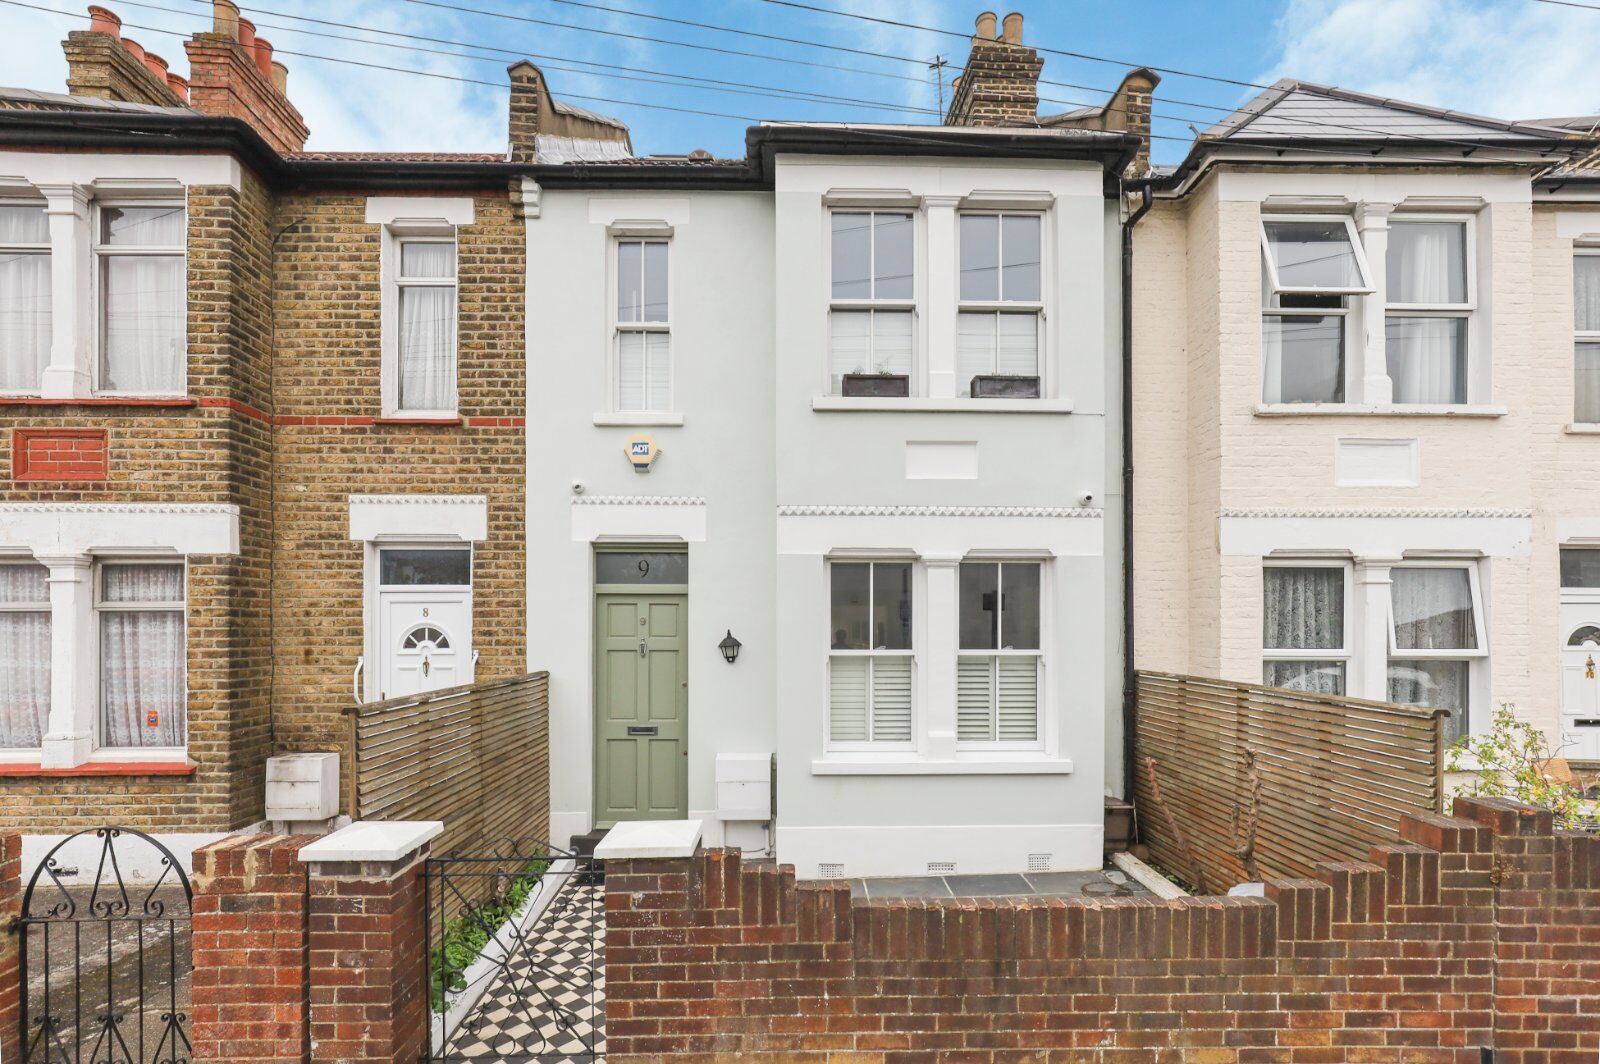 3 bedroom mid terraced house for sale Edith Road, Wimbledon, SW19, main image